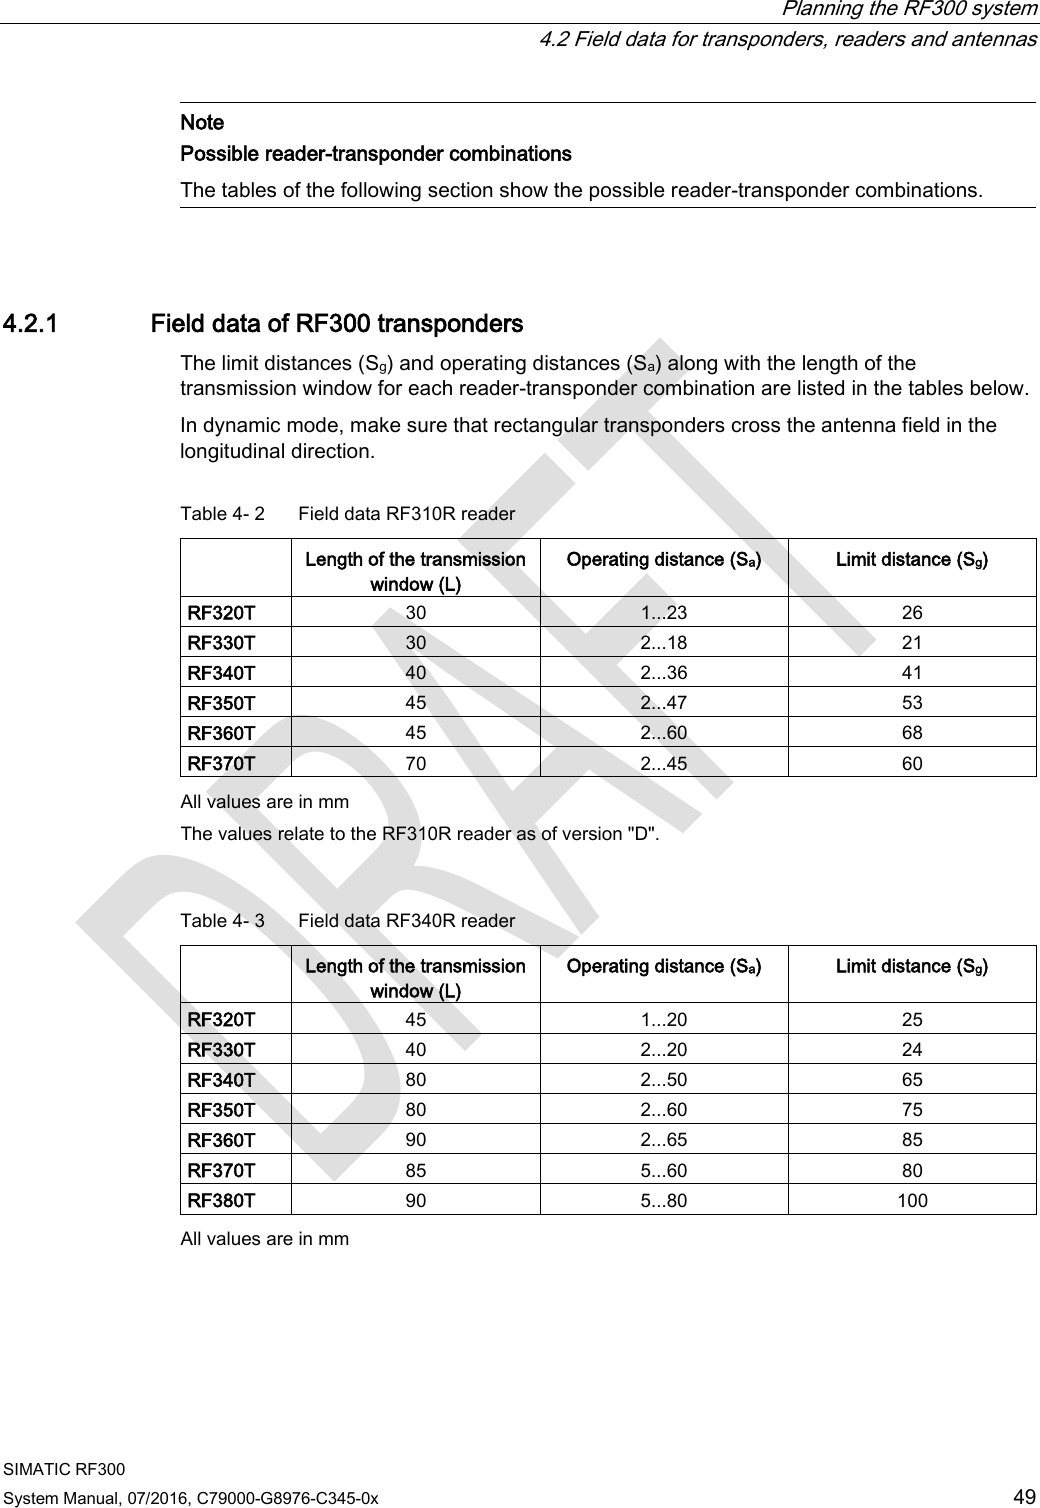  Planning the RF300 system  4.2 Field data for transponders, readers and antennas SIMATIC RF300 System Manual, 07/2016, C79000-G8976-C345-0x 49  Note Possible reader-transponder combinations The tables of the following section show the possible reader-transponder combinations.  4.2.1 Field data of RF300 transponders The limit distances (Sg) and operating distances (Sa) along with the length of the transmission window for each reader-transponder combination are listed in the tables below.  In dynamic mode, make sure that rectangular transponders cross the antenna field in the longitudinal direction.  Table 4- 2  Field data RF310R reader  Length of the transmission window (L) Operating distance (Sa) Limit distance (Sg) RF320T 30 1...23 26 RF330T 30 2...18 21 RF340T 40 2...36 41 RF350T 45 2...47 53 RF360T 45 2...60 68 RF370T 70 2...45 60  All values are in mm The values relate to the RF310R reader as of version &quot;D&quot;.  Table 4- 3  Field data RF340R reader  Length of the transmission window (L) Operating distance (Sa) Limit distance (Sg) RF320T 45 1...20 25 RF330T 40 2...20 24 RF340T 80 2...50 65 RF350T 80 2...60 75 RF360T 90 2...65 85 RF370T 85 5...60 80 RF380T 90 5...80 100  All values are in mm  